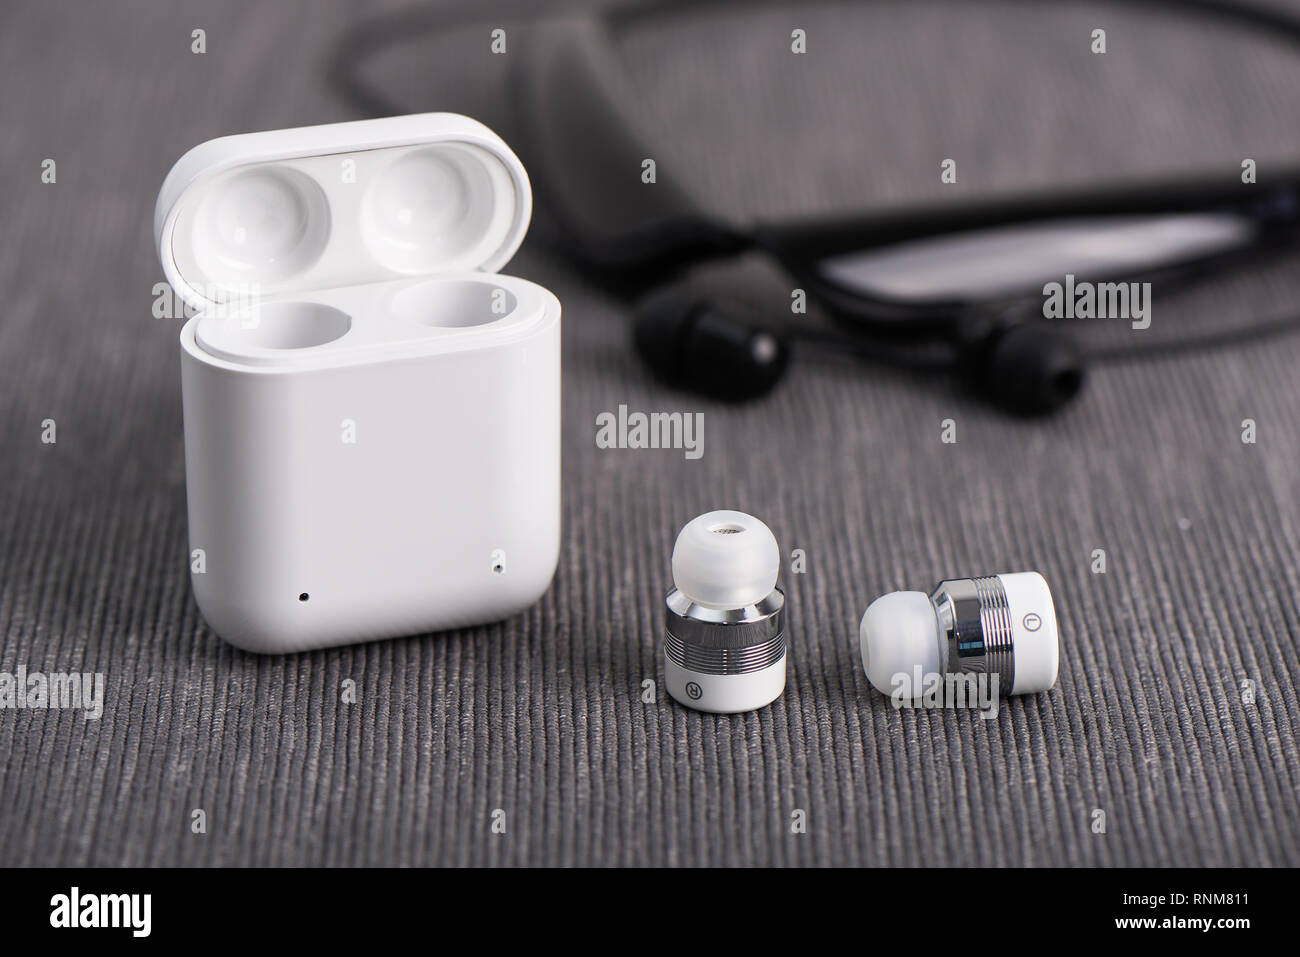 wireless cordless bluetooth earbuds with chargeable case on a background of neck band type earphone Stock Photo